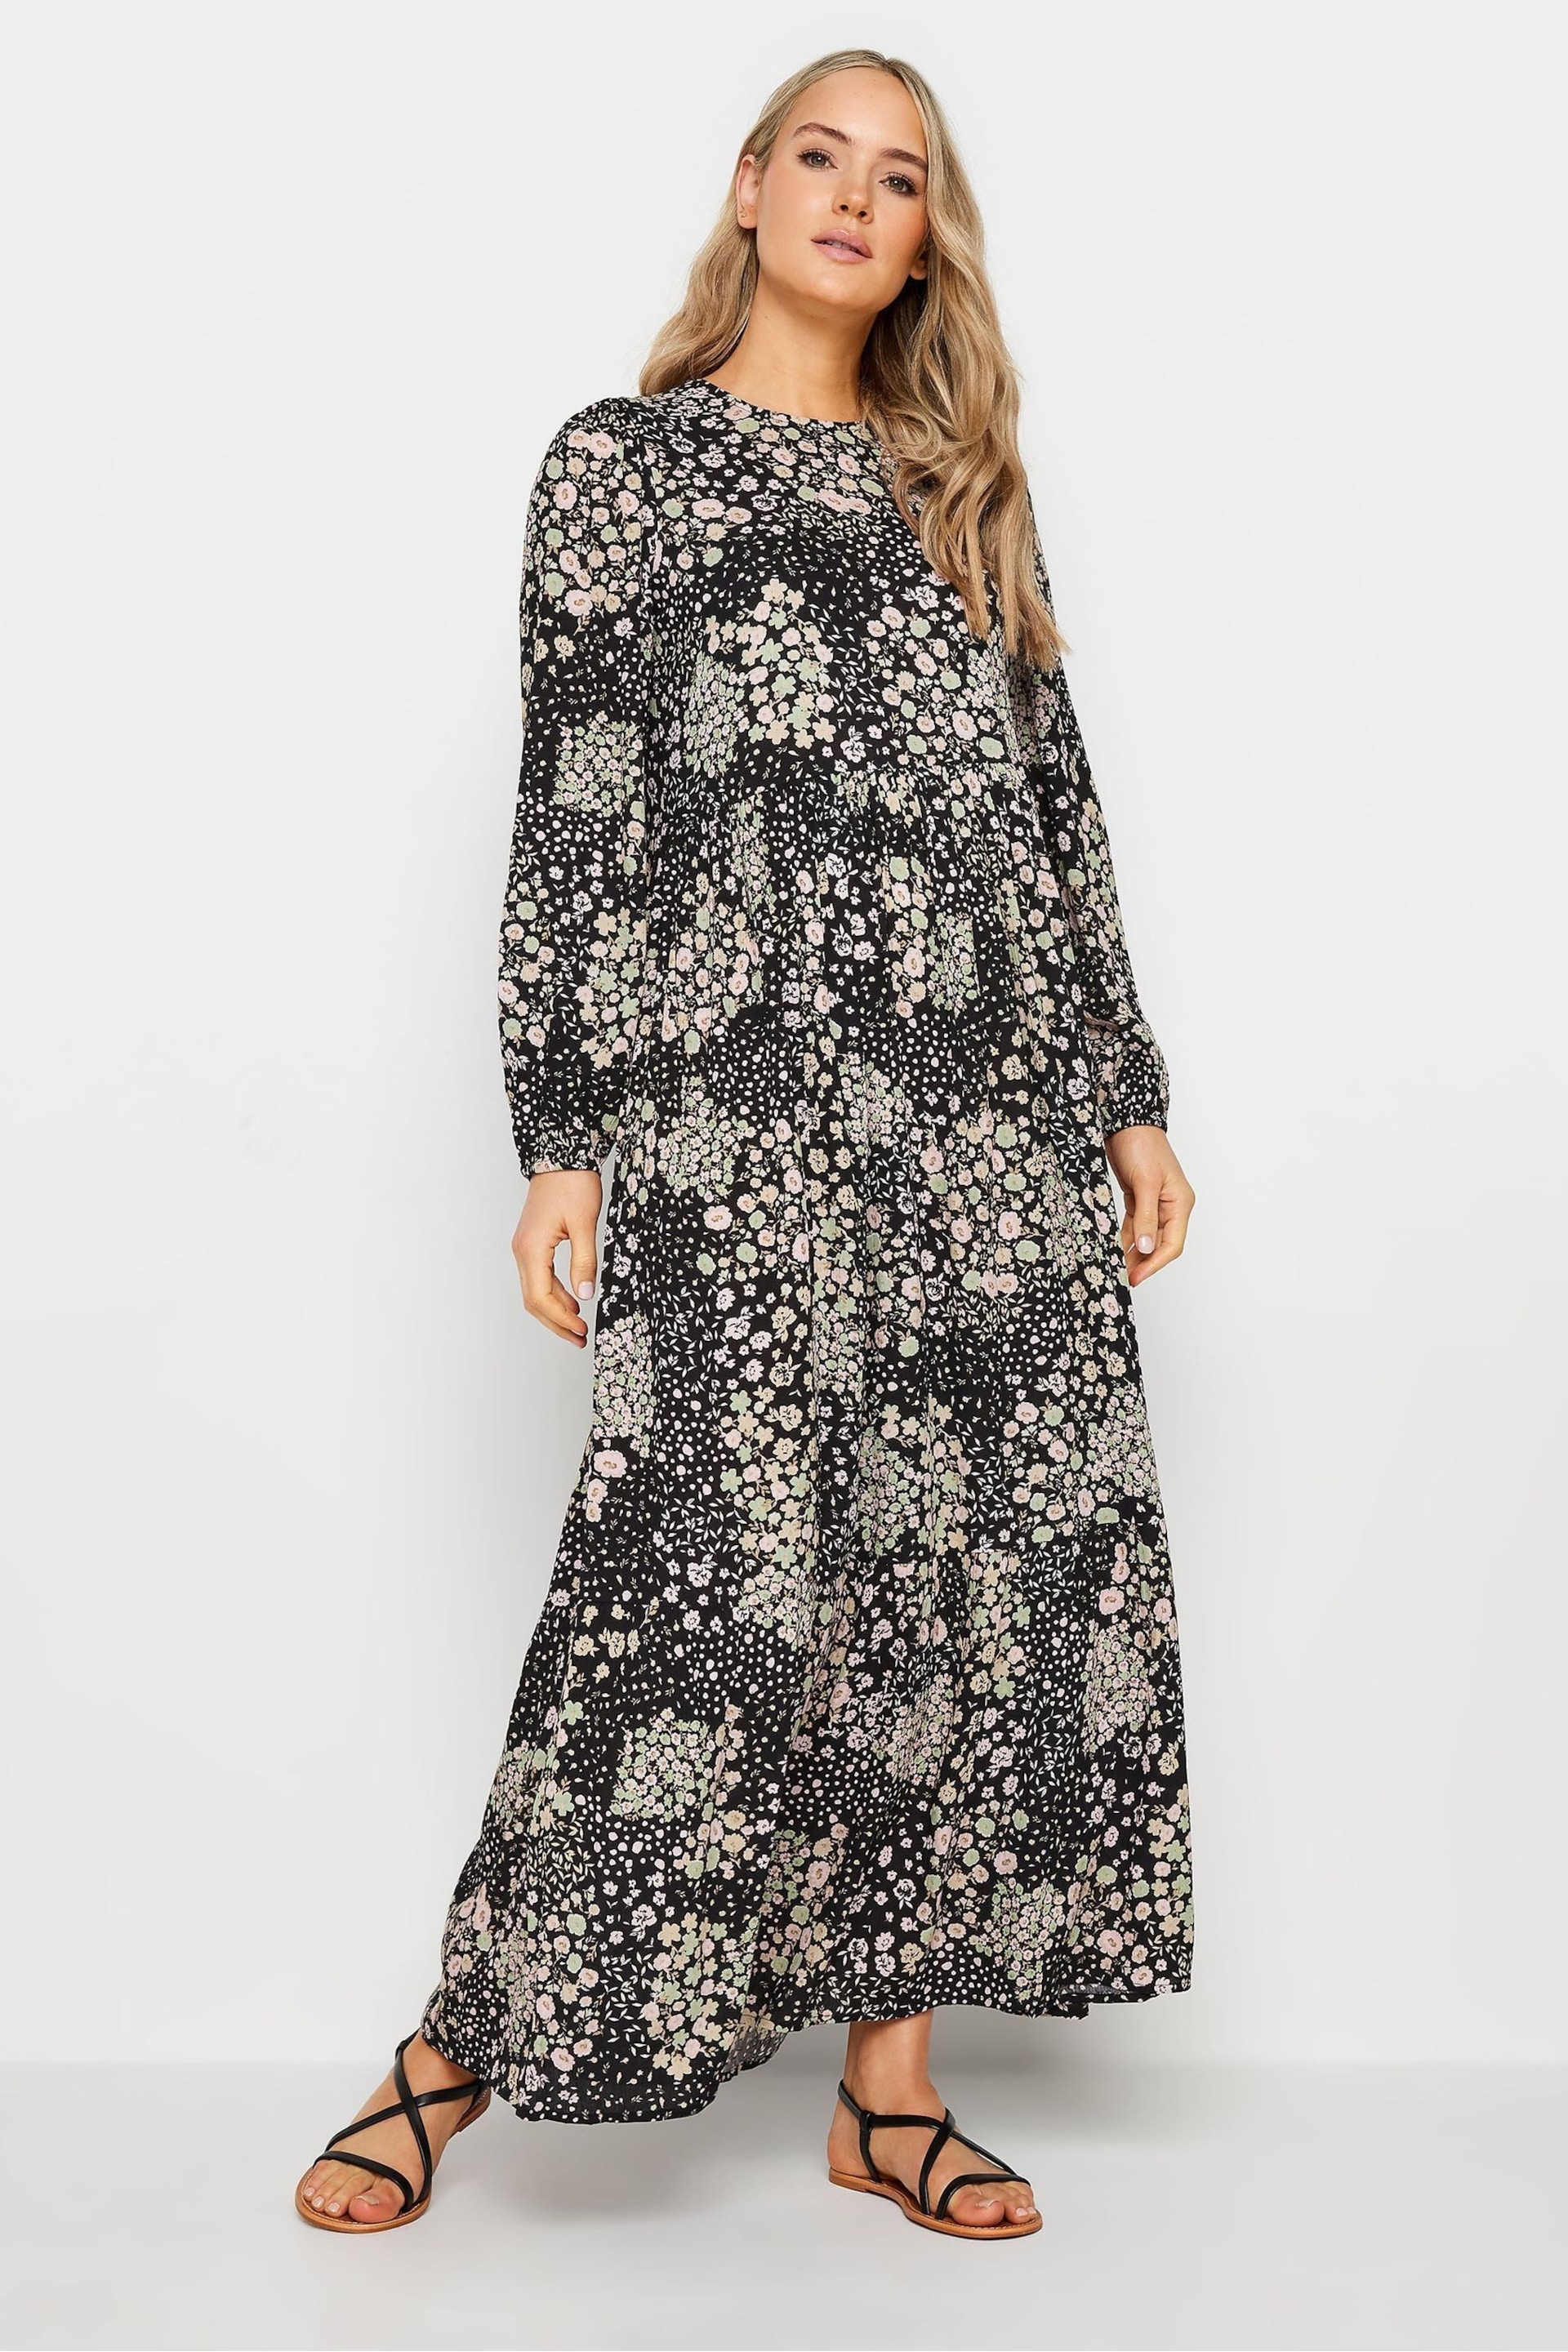 Long Tall Sally Black Floral Print Tiered Maxi Dress - Image 2 of 5